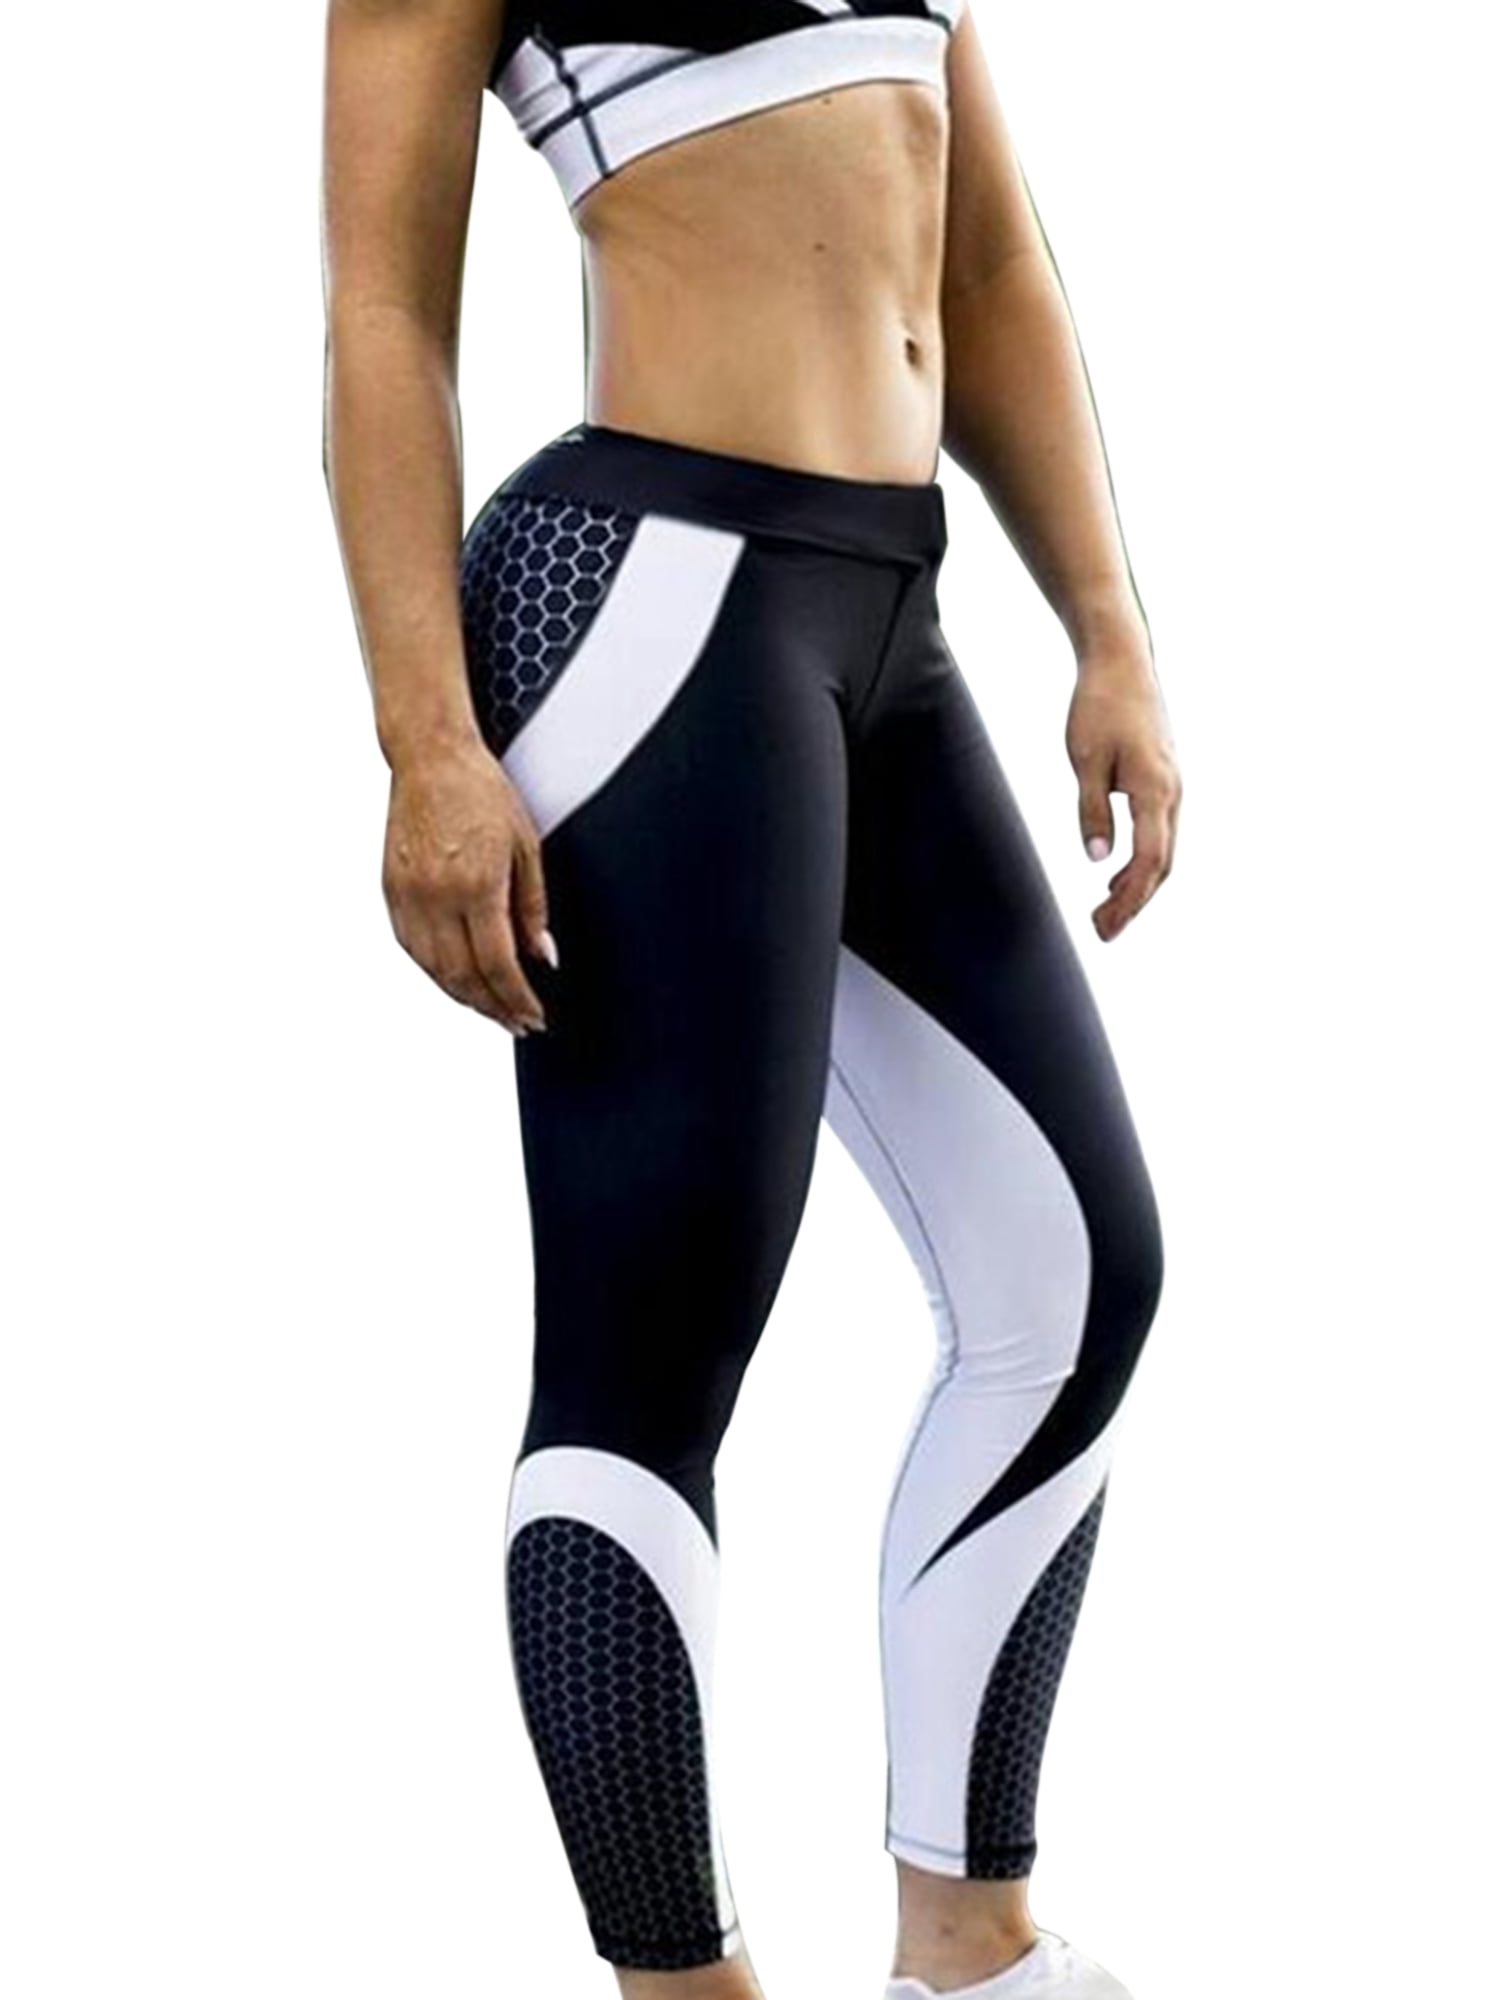 Womens Sport Compression Fitness Leggings Running Yoga Gym Pants Ladies Trousers 